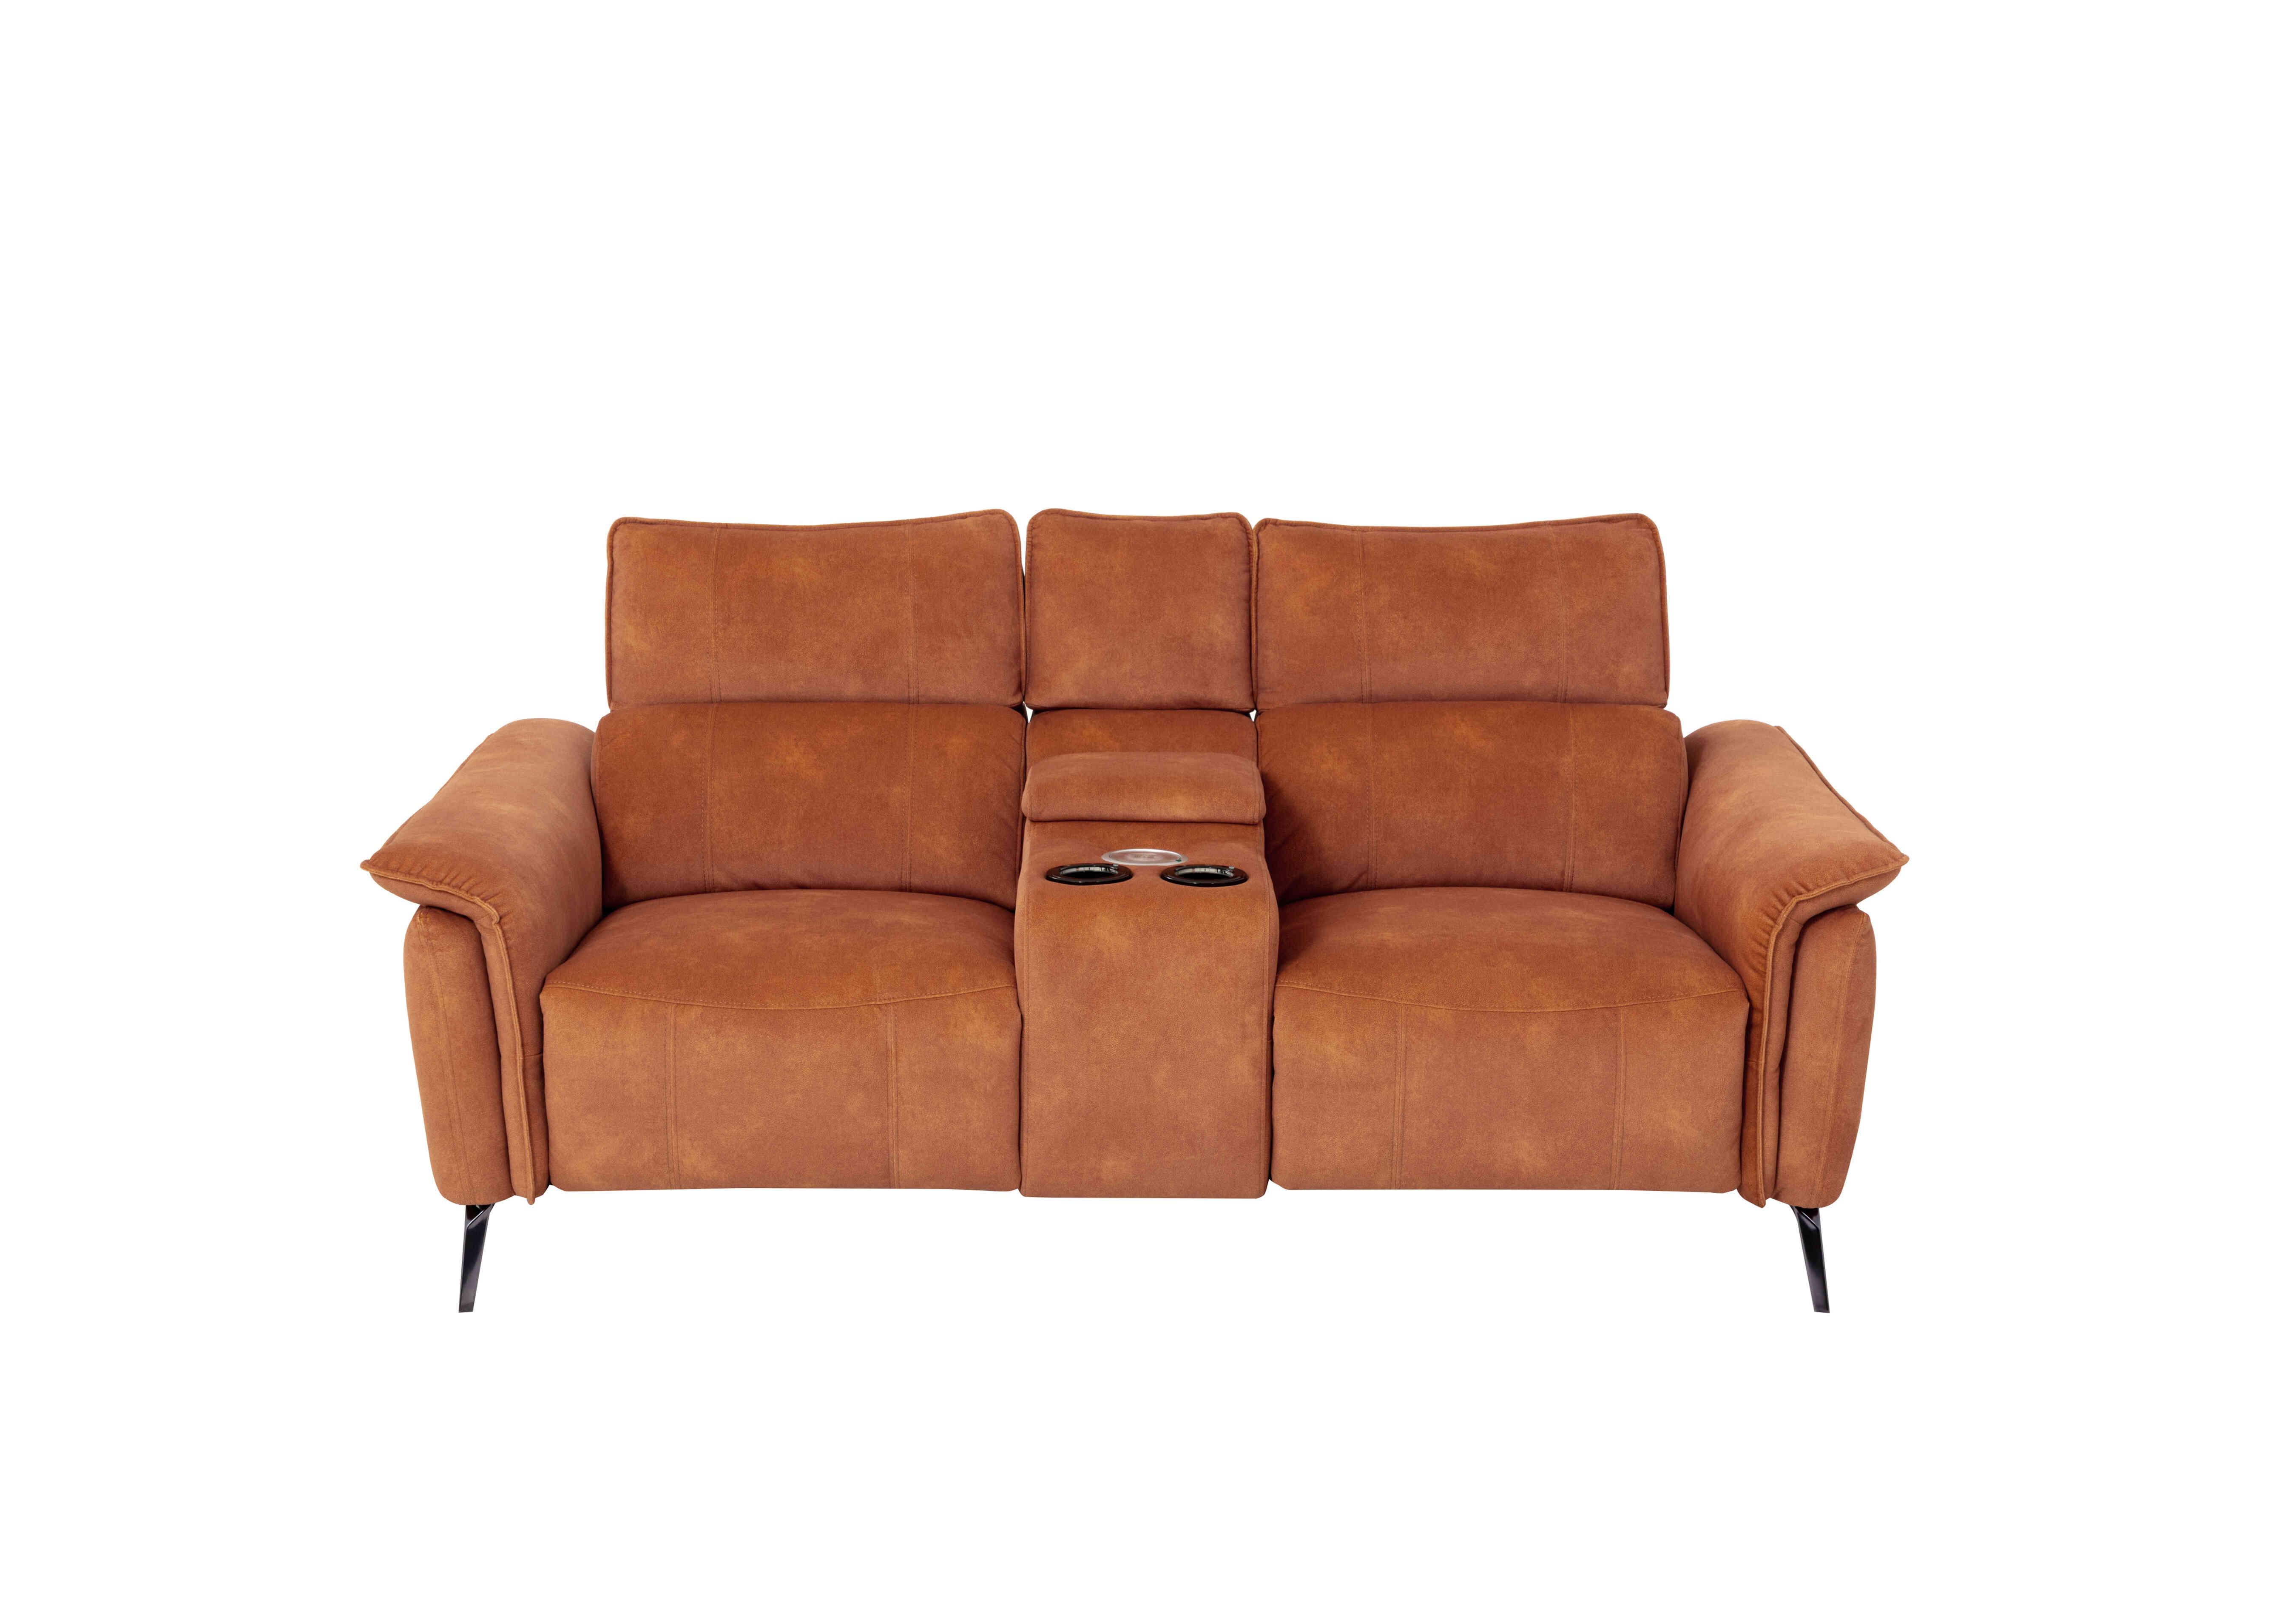 Jude 2 Seater Fabric Power Recliner Sofa with Smart Console Unit and Power Telescopic Headrests in Pumpkin Dexter 09 43509 on Furniture Village